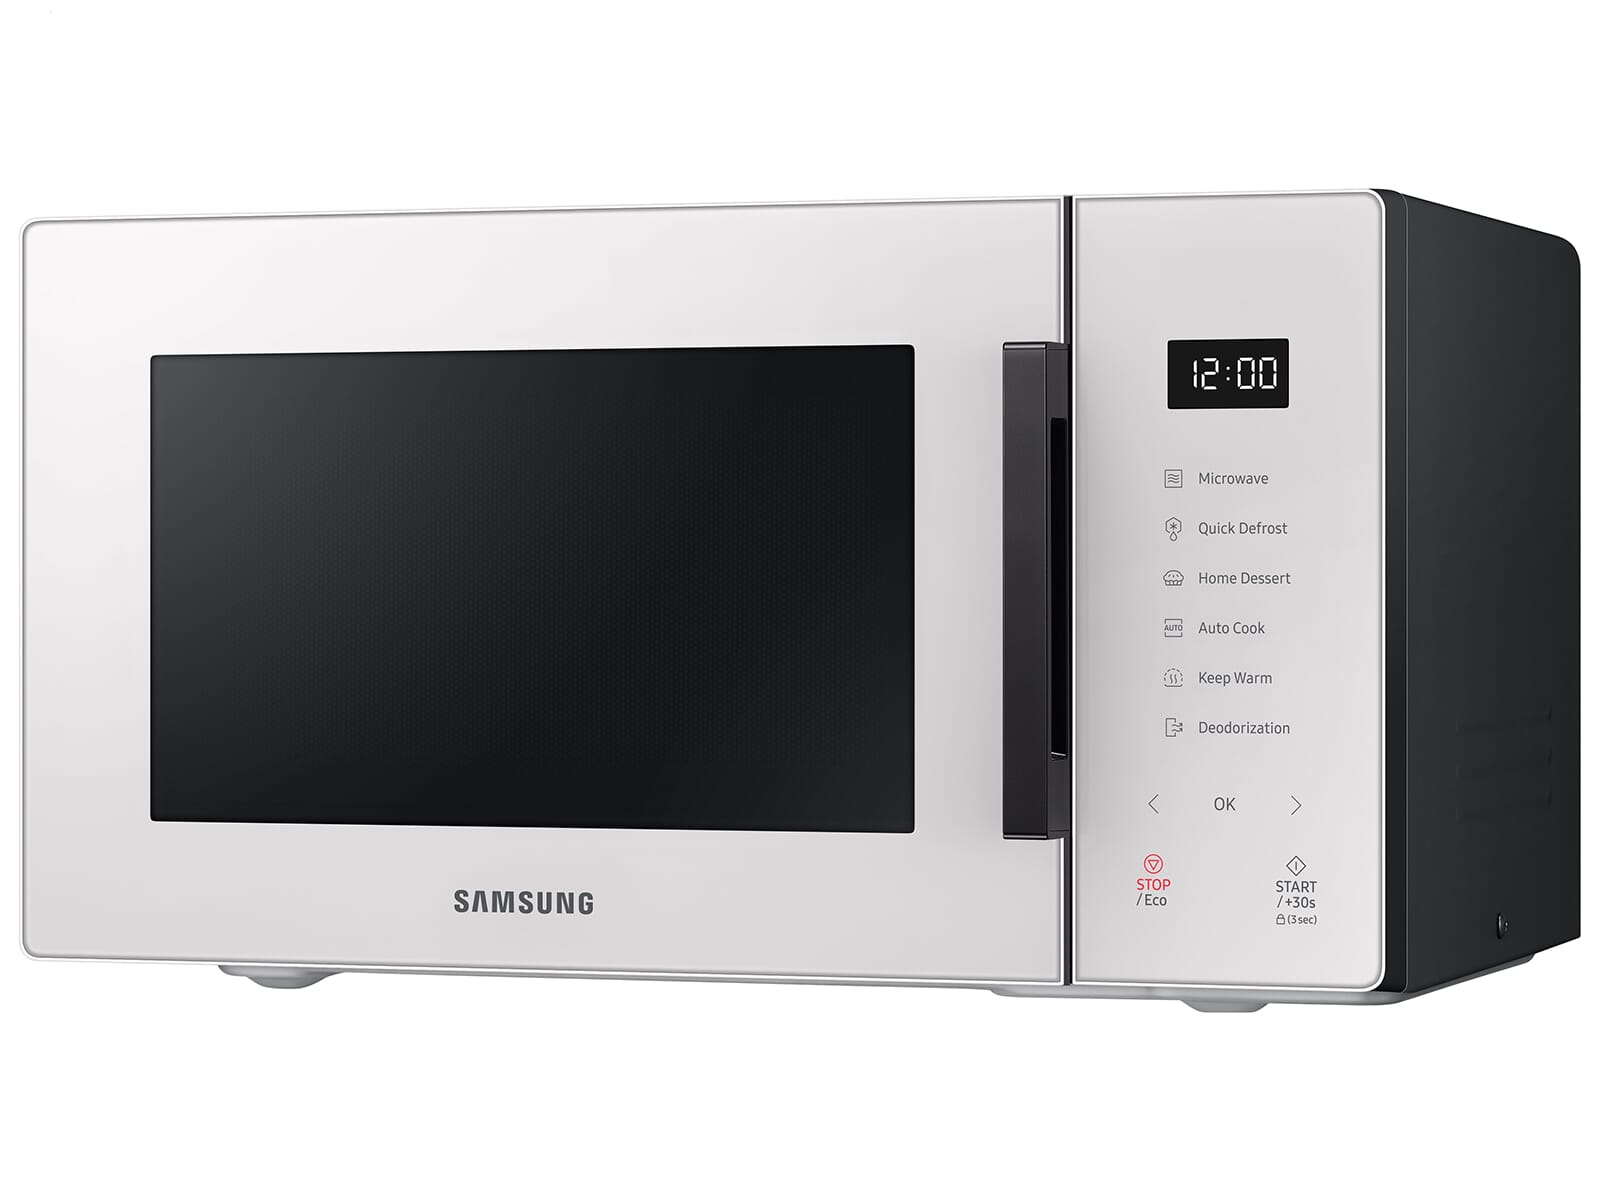 Samsung Bespoke Stand-Mikrowelle Creme MS2GT5018AE/EG